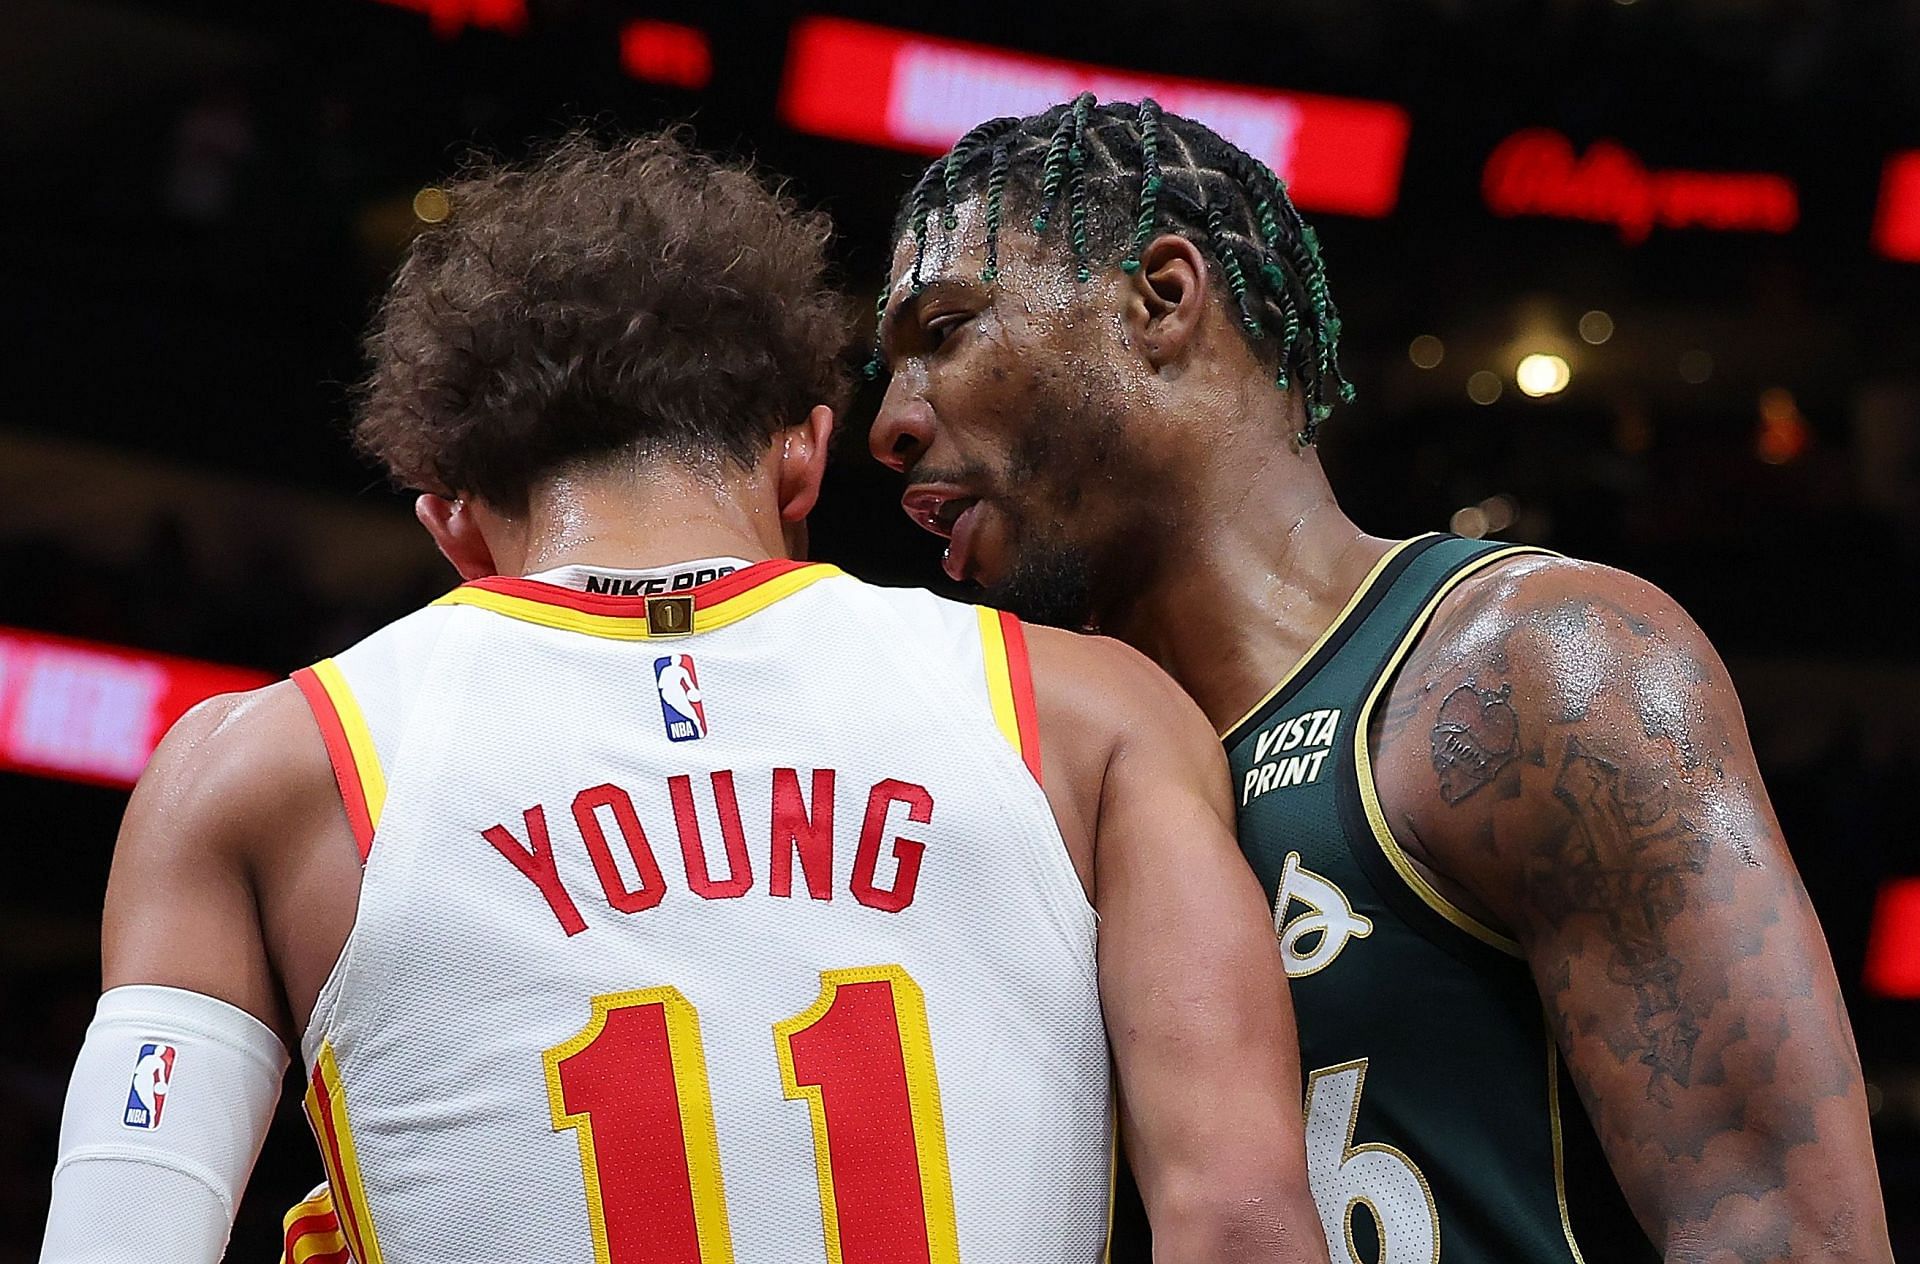 Atlanta Hawks star point guard Trae Young and Boston Celtics guard Marcus Smart engaged in an on-court altercation on Saturday